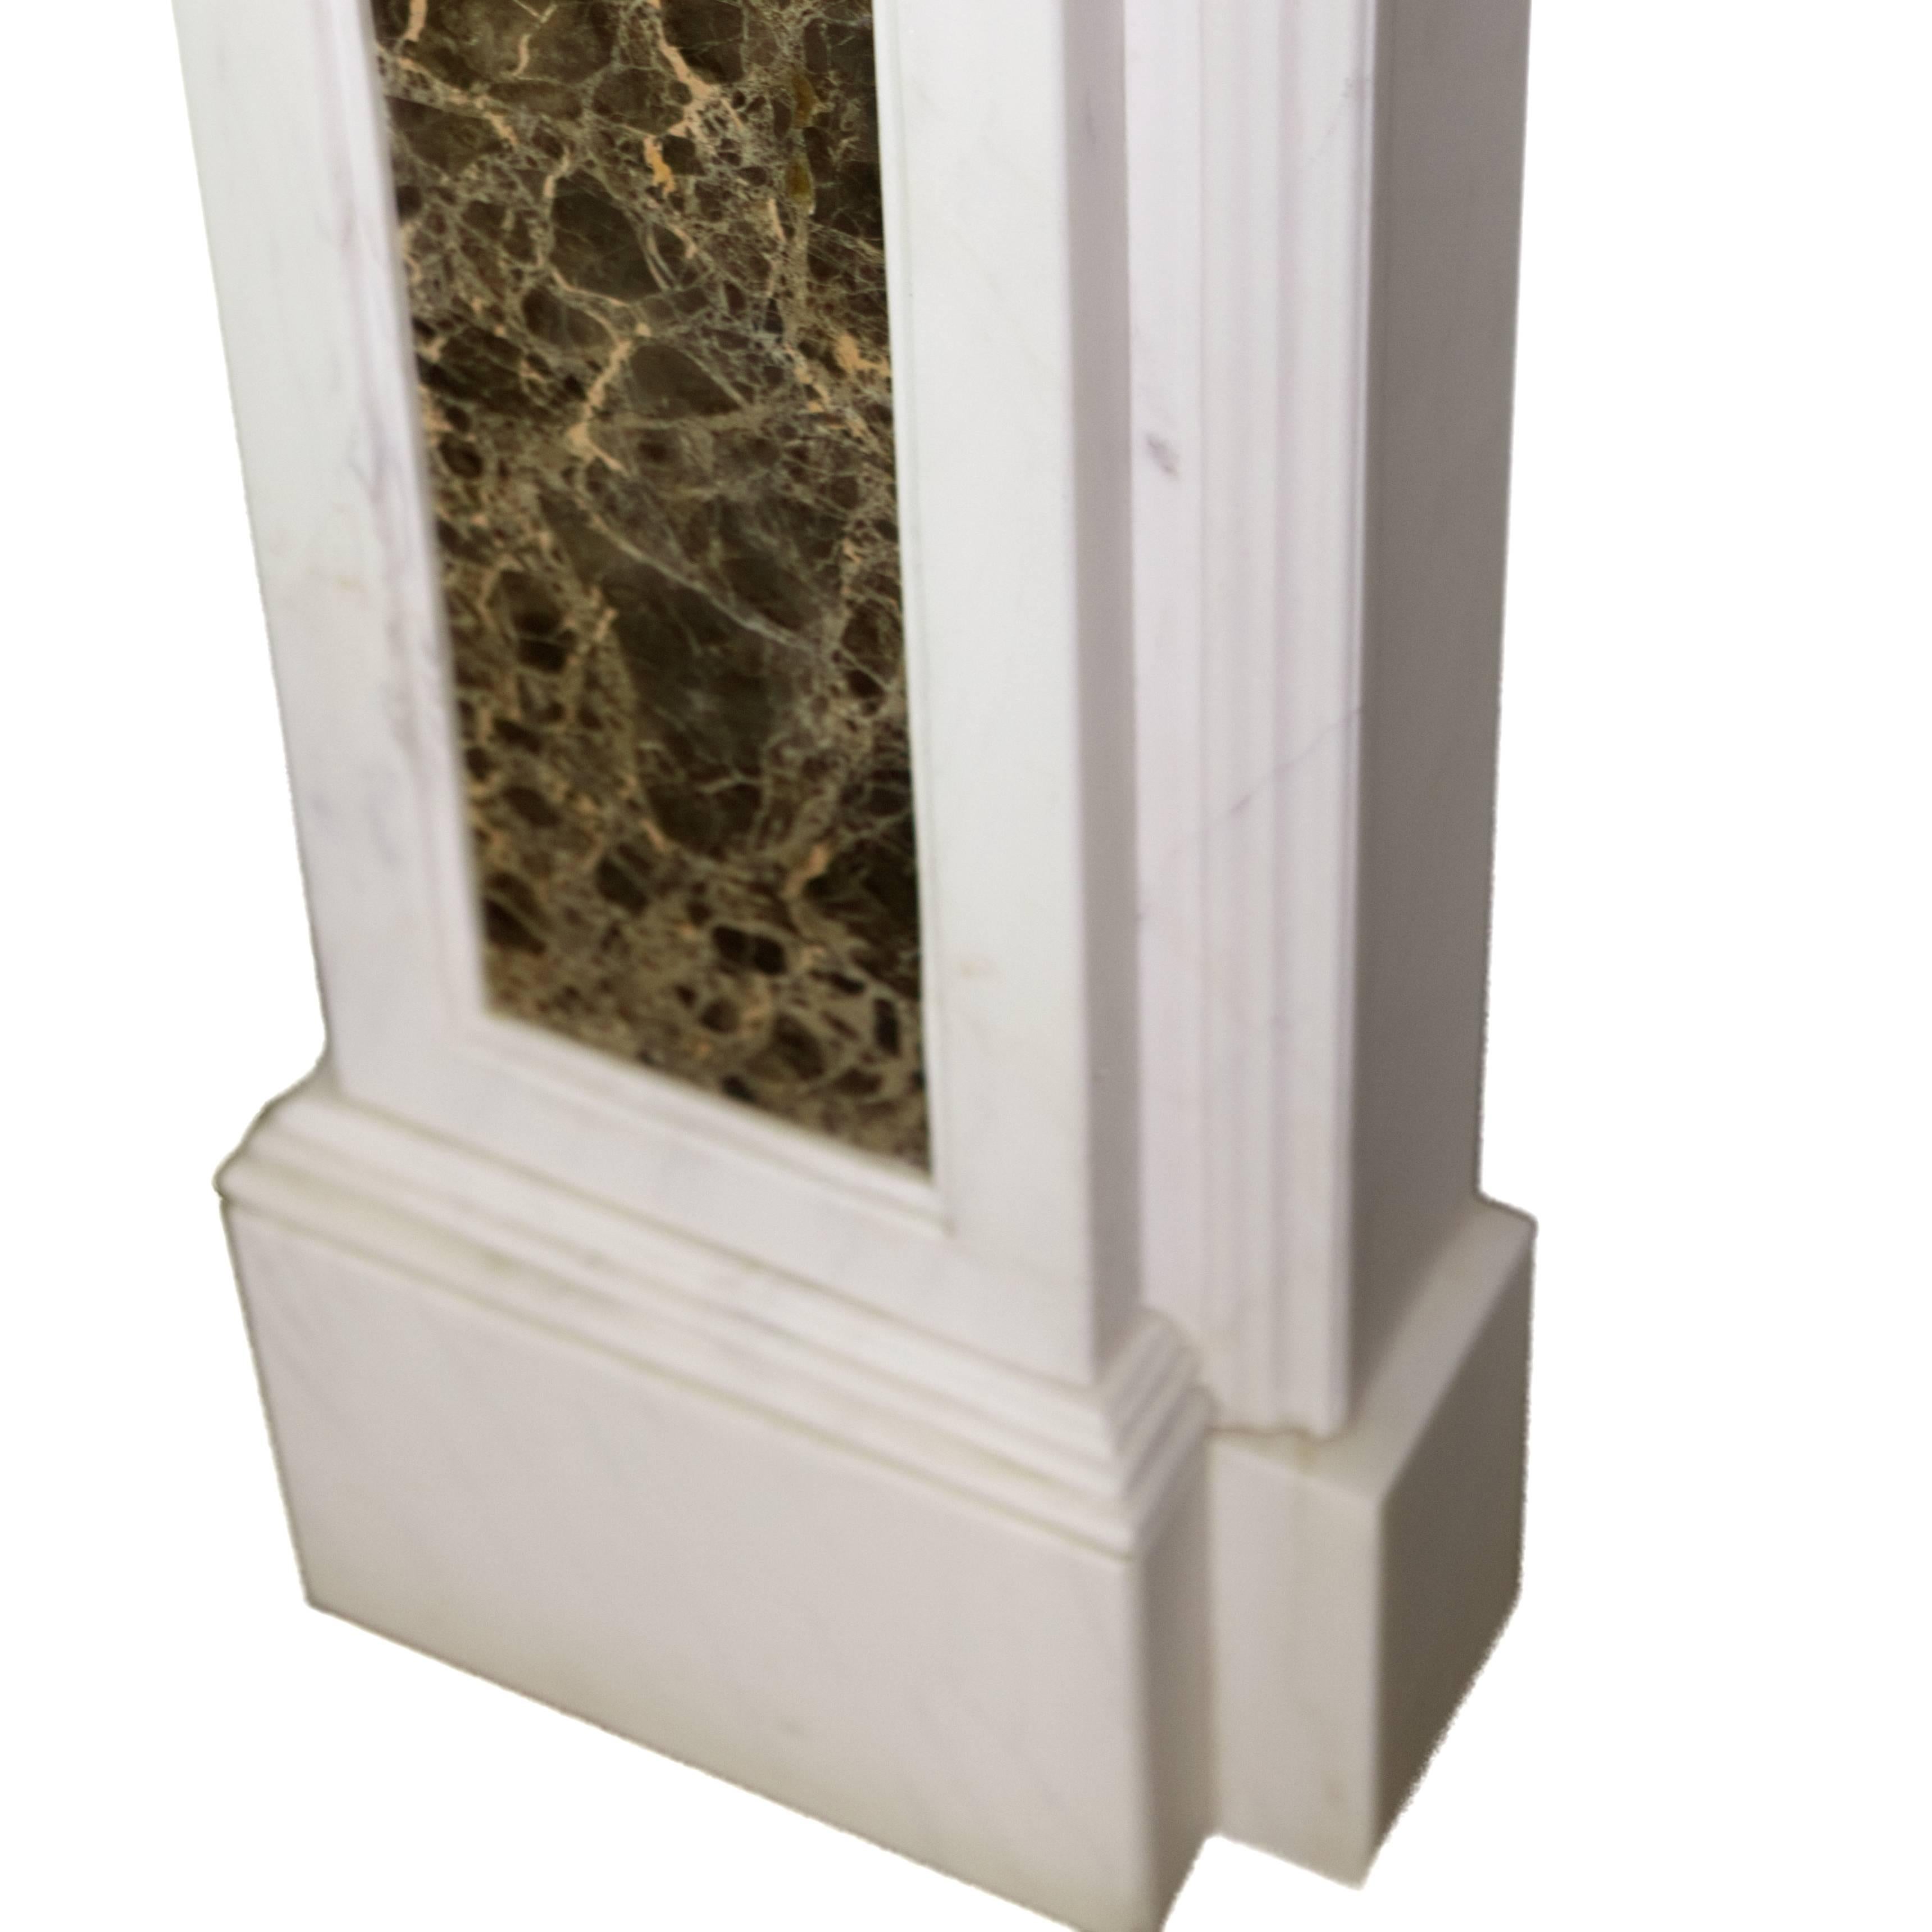 English 20th Century Georgian Style Marble Fireplace Mantelpiece For Sale